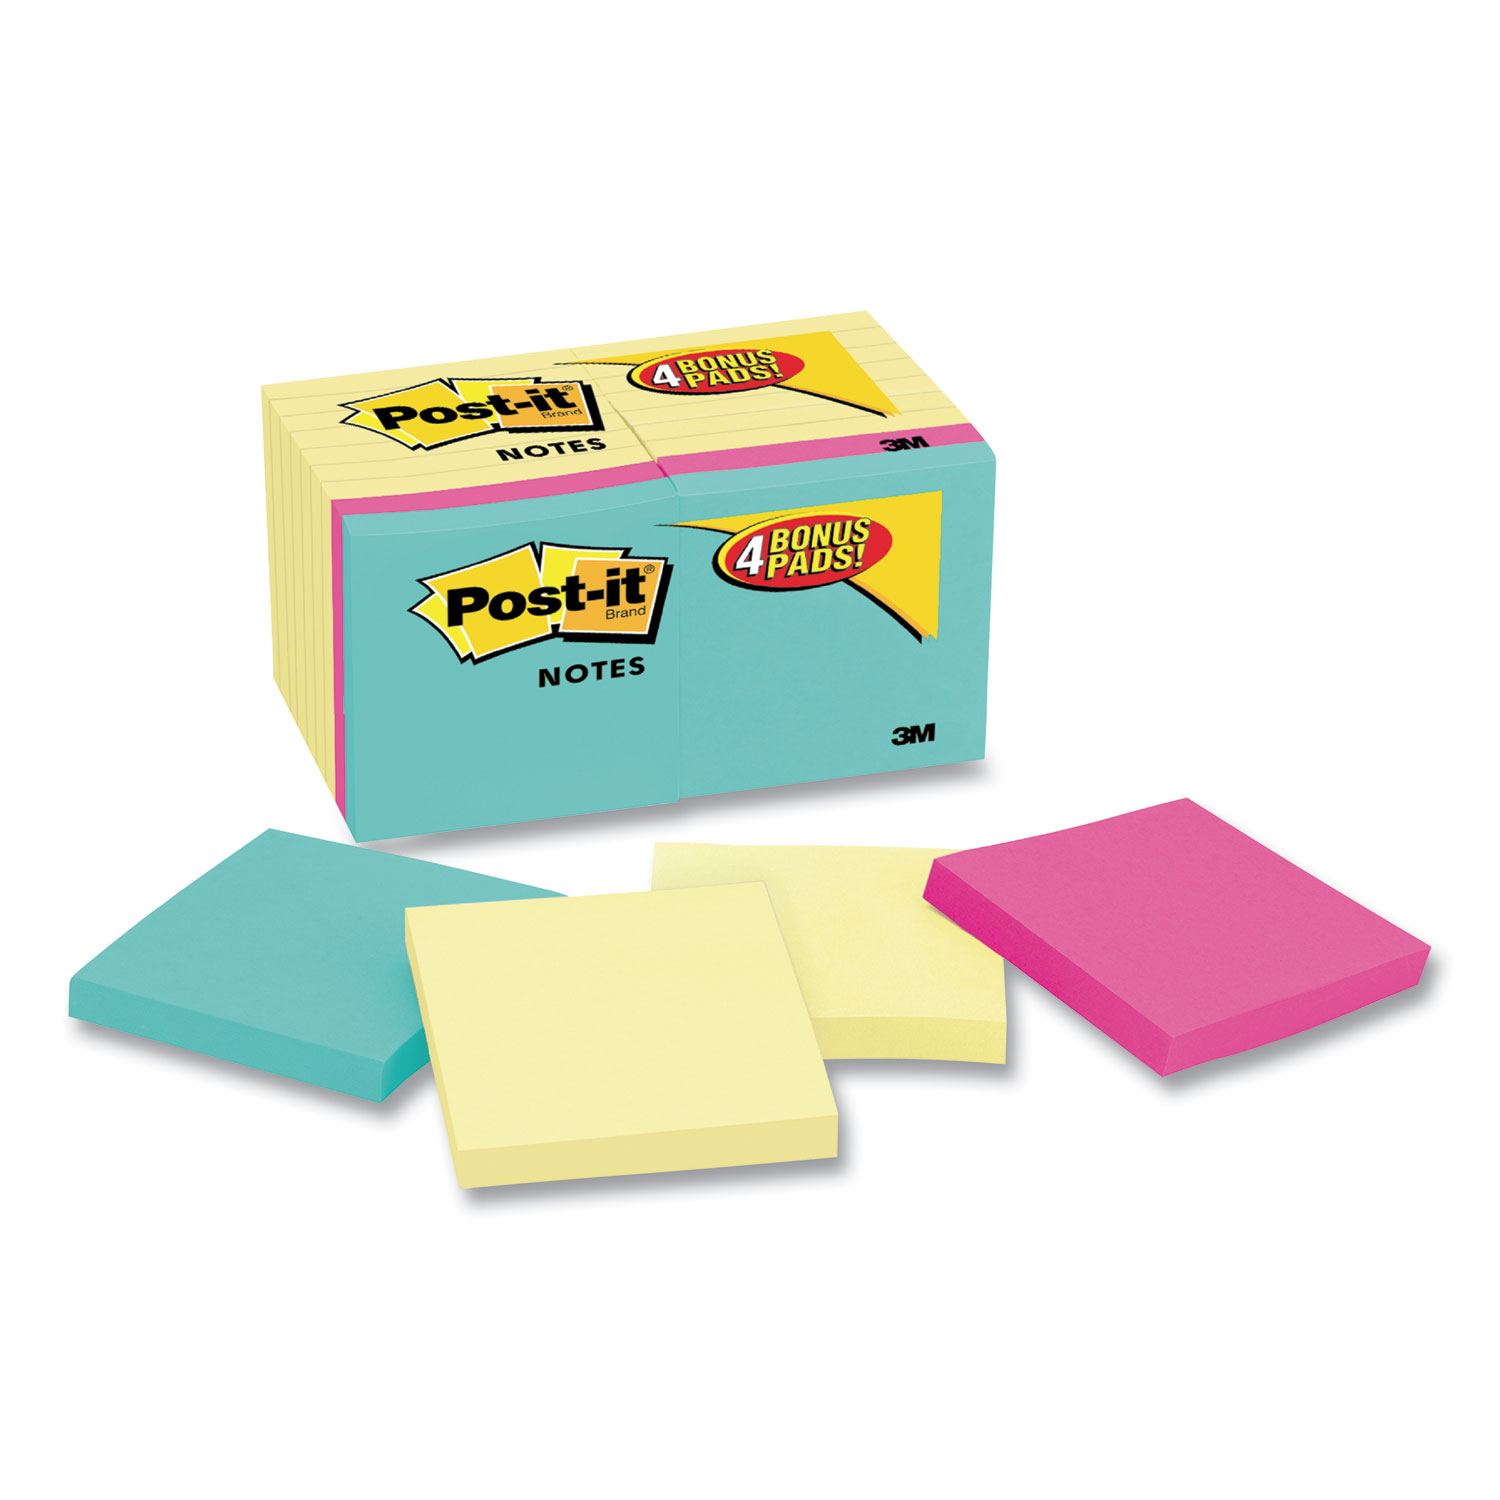  Post-it Notes 654-14-4B Original Pads Value Pack, 3 x 3, Canary Yellow/Cape Town, 100-Sheet, 18 Pads (MMM654144B) 